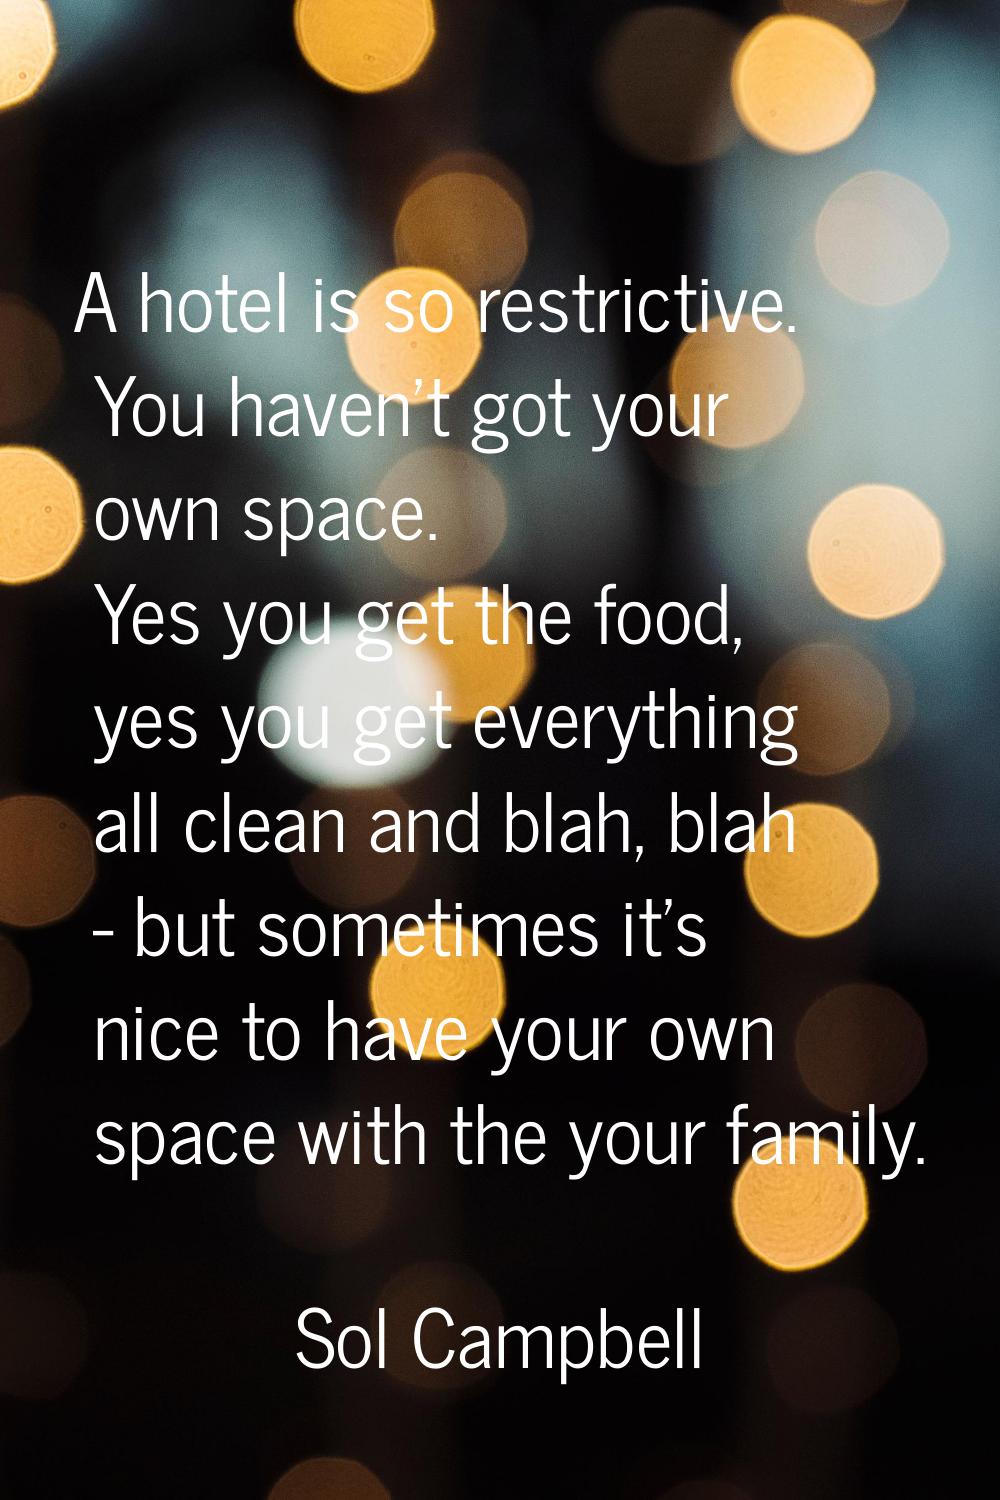 A hotel is so restrictive. You haven't got your own space. Yes you get the food, yes you get everyt